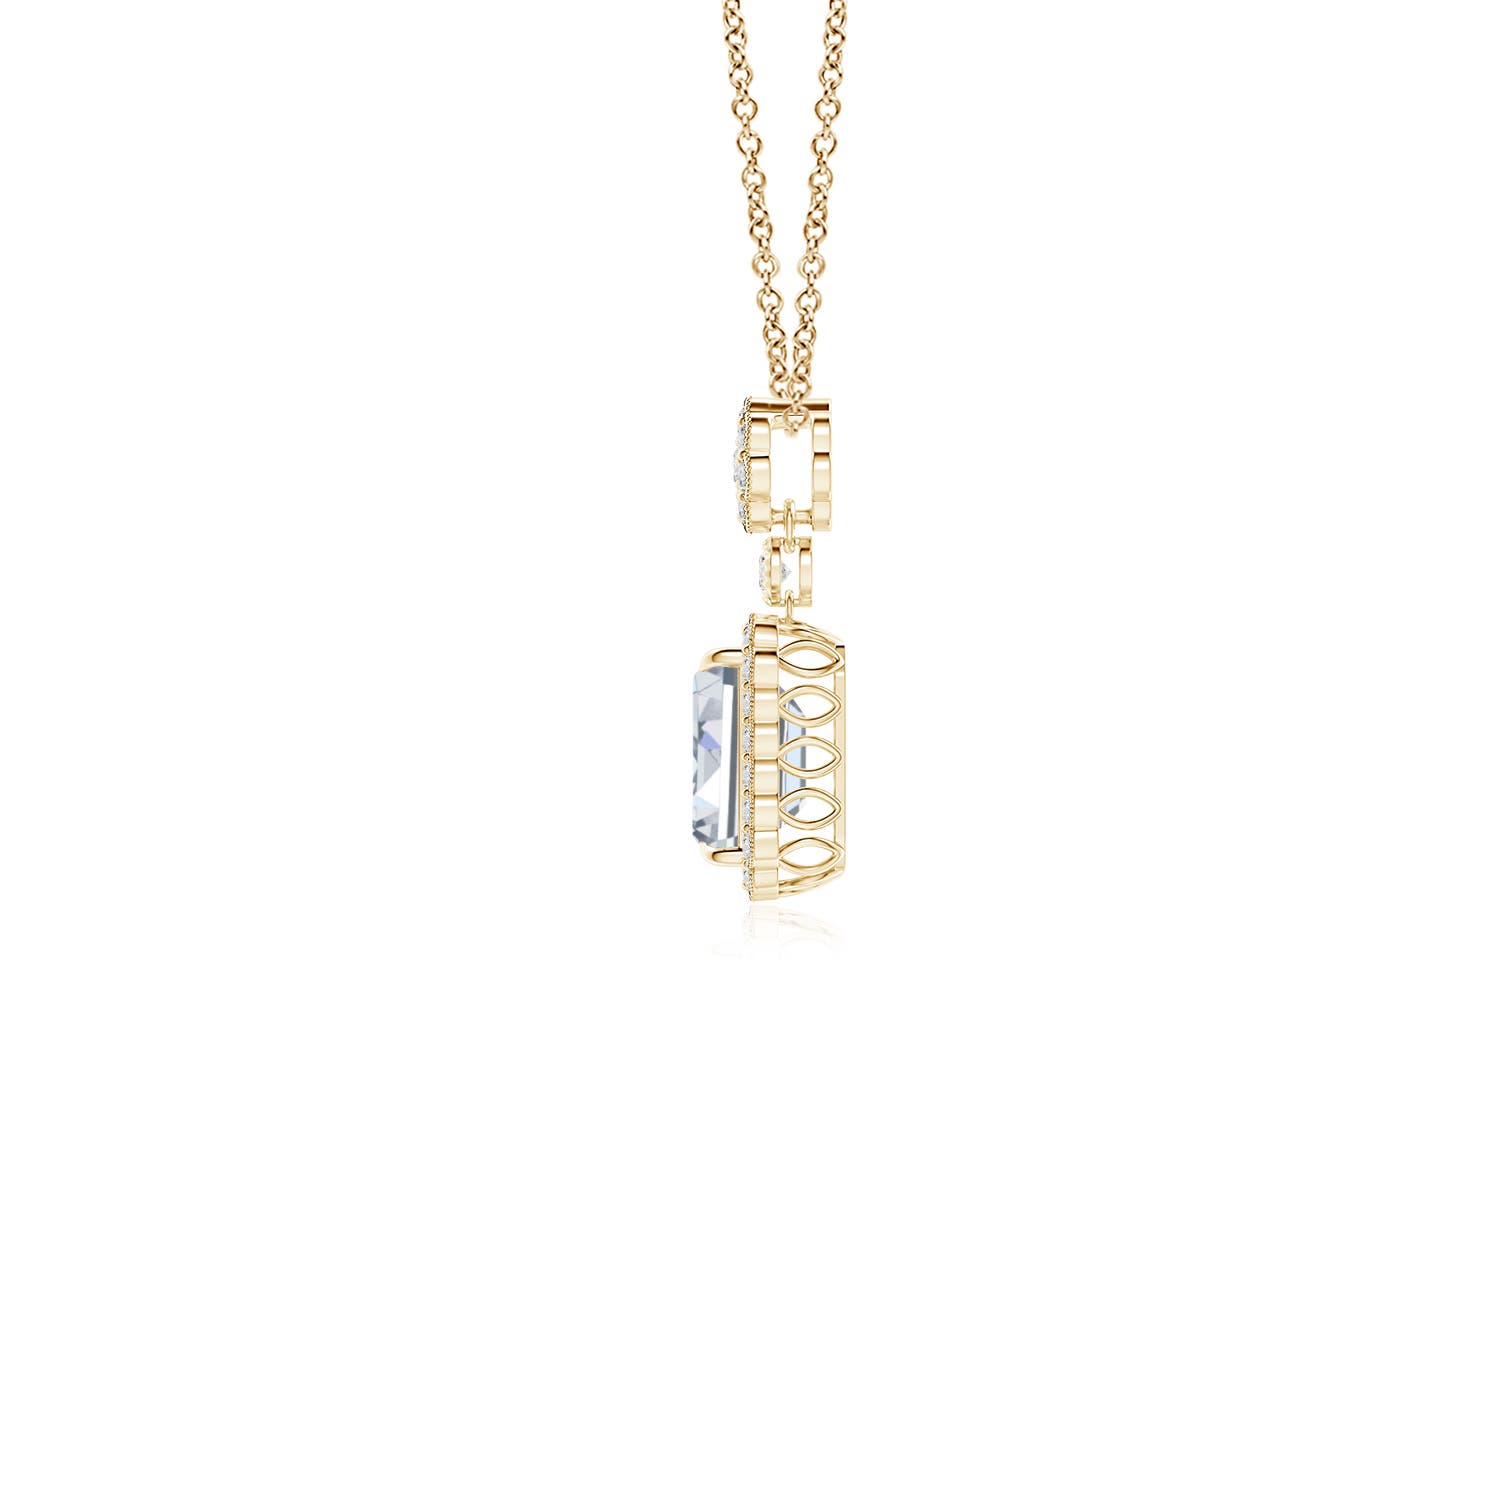 H, SI2 / 0.78 CT / 14 KT Yellow Gold